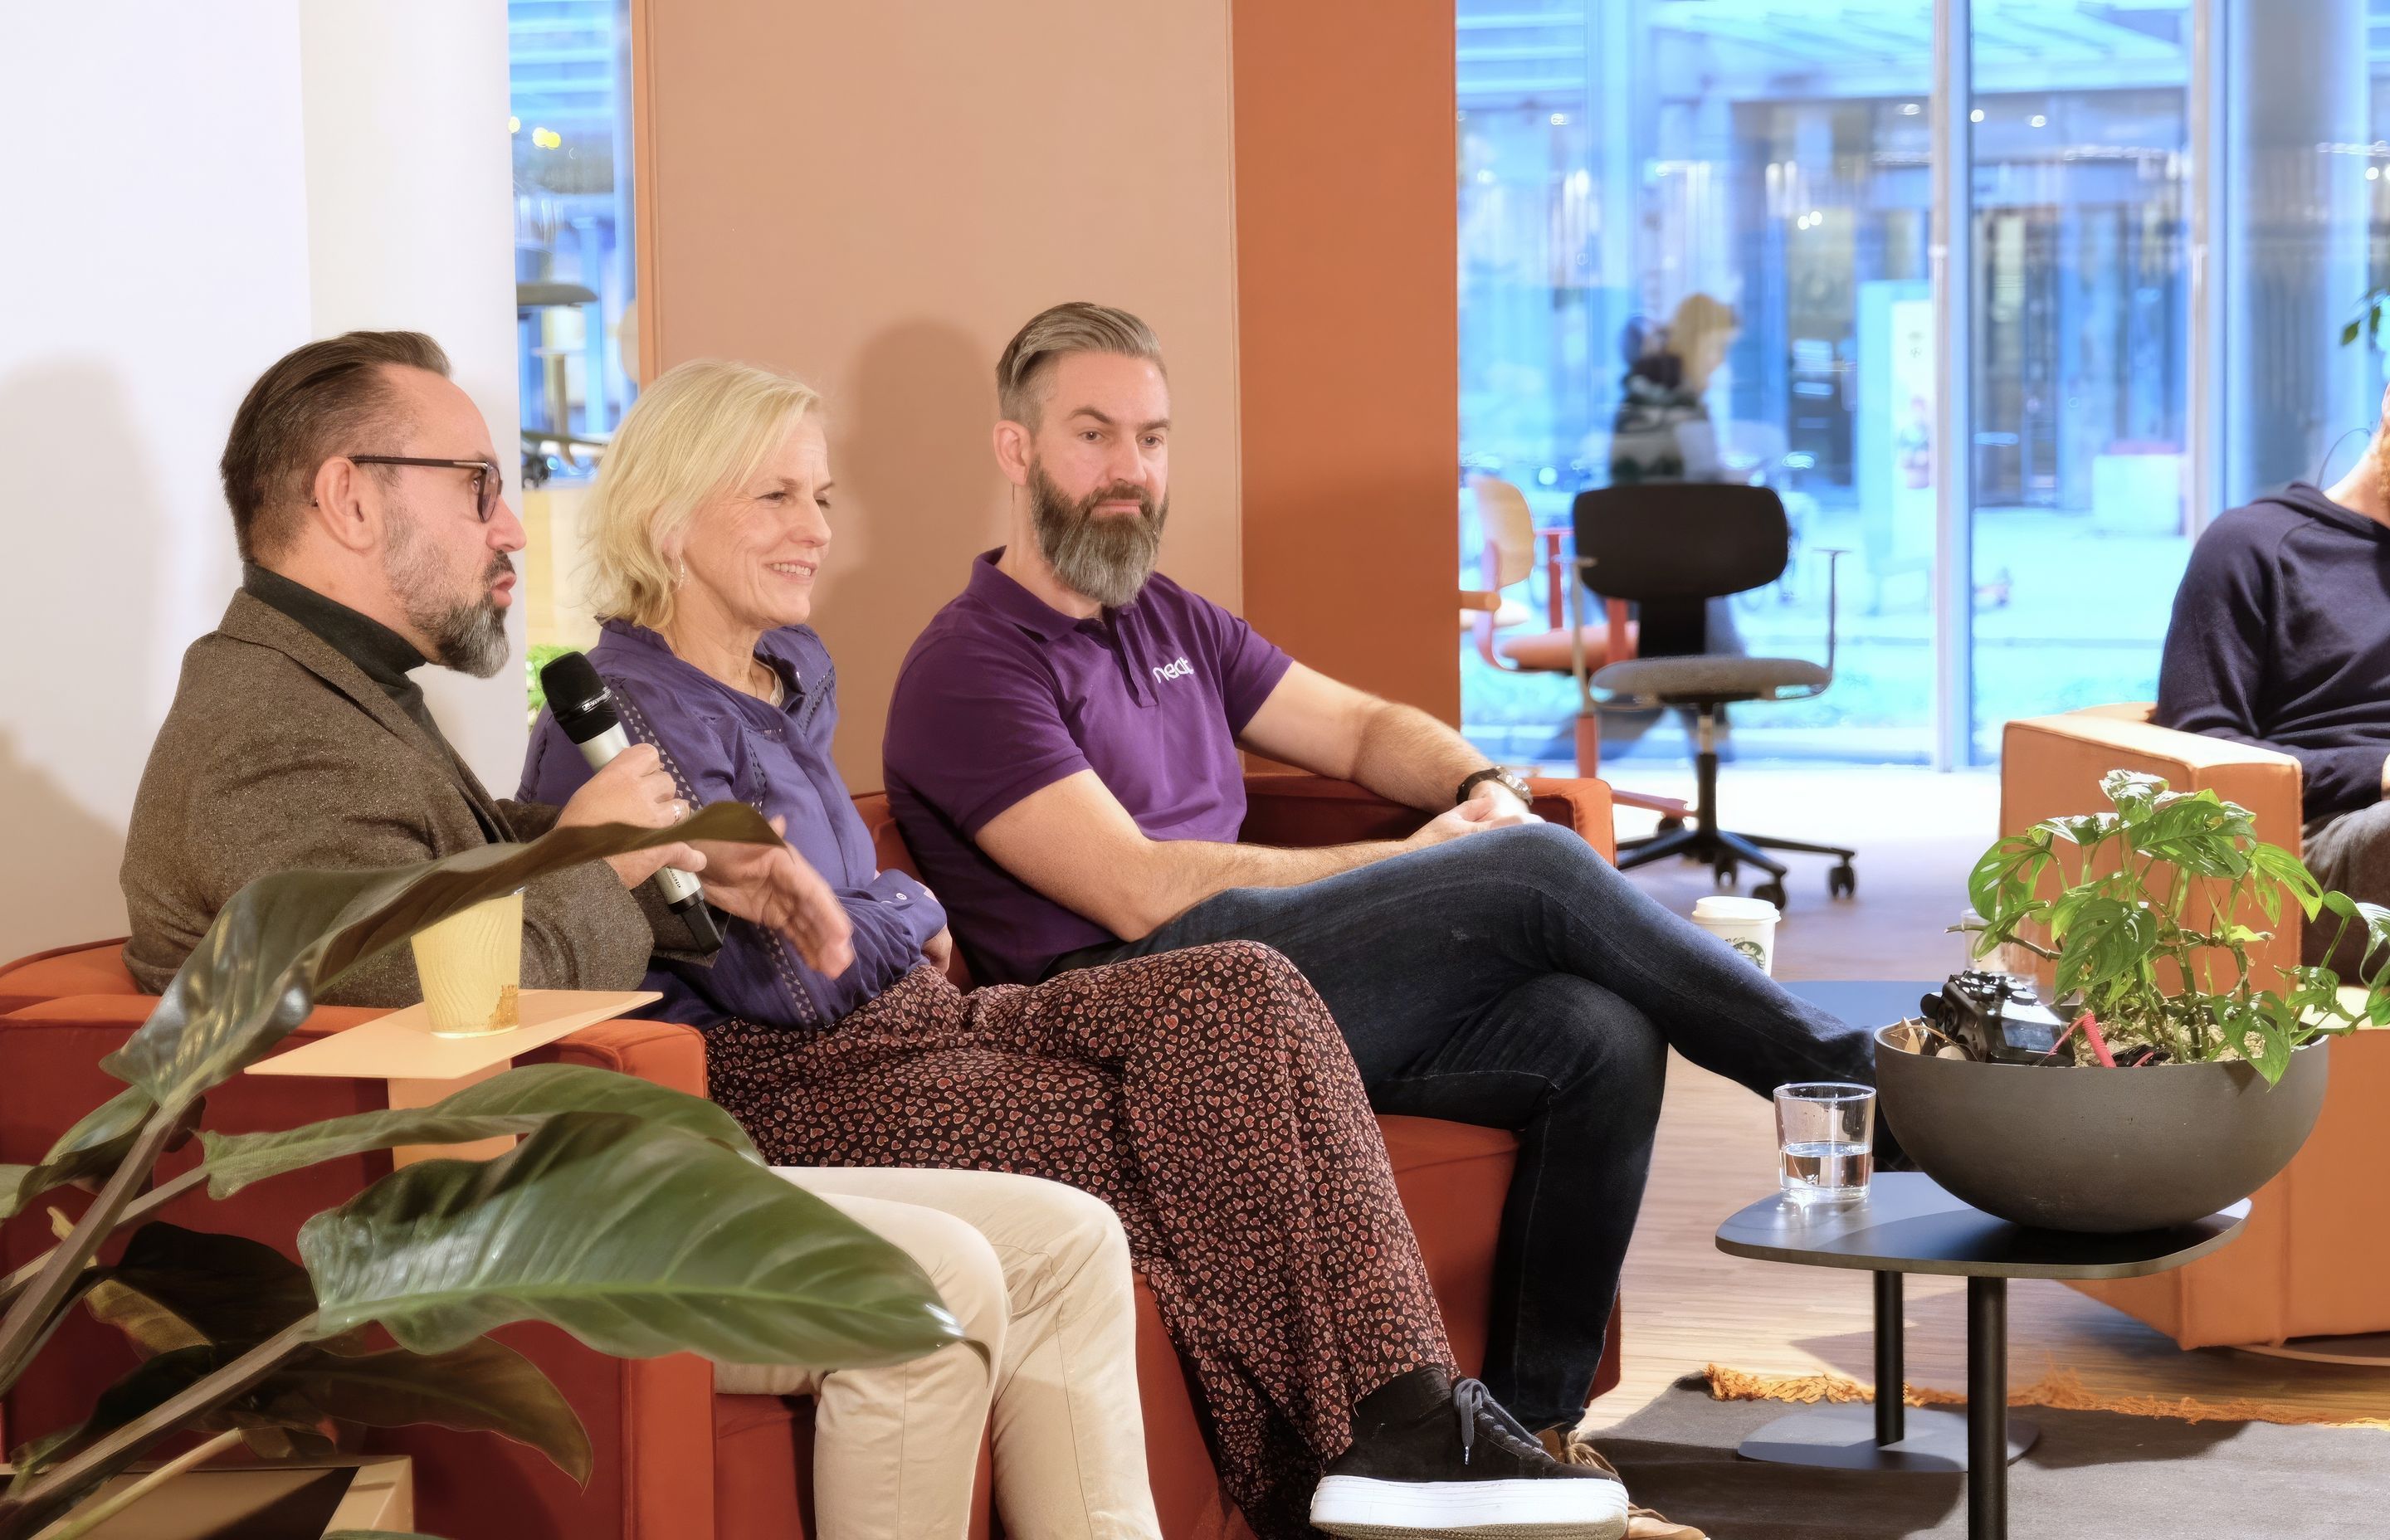 L-R: Lars Erik Morum, Team Technology Specialist at Microsoft, Heidi Tolo, Partner and Interior Architect at iARK, Simon Teigre, Chief of Emerging Innovation and co-founder of Neat, Christian Lodgaard, Flokk Chief Design Officer